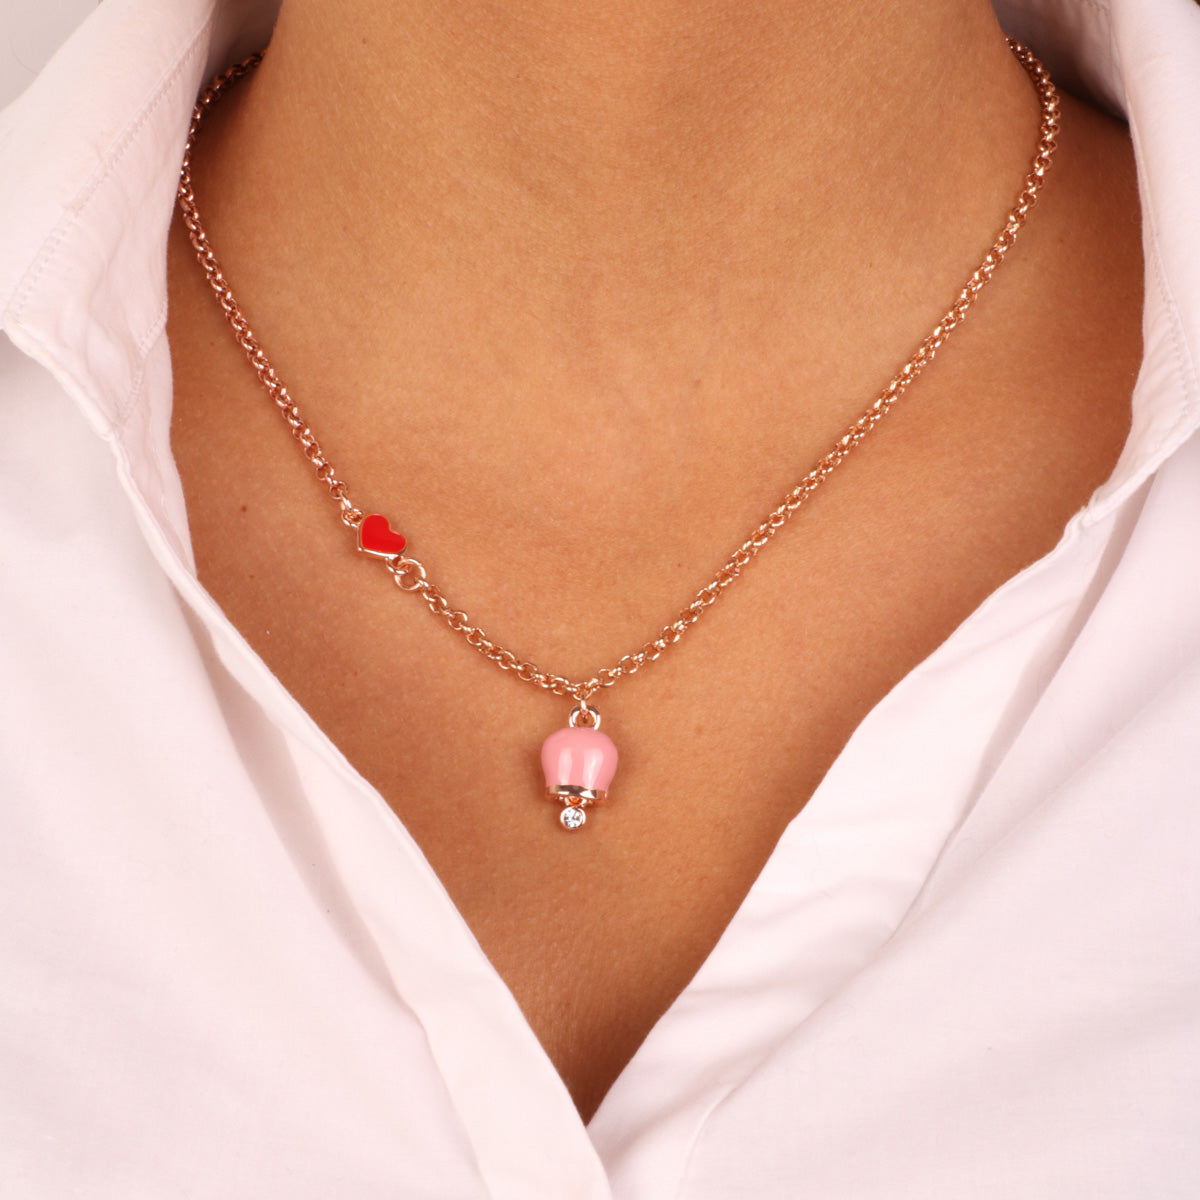 Metal necklace with red heart and rose pendant charm, embellished with light point